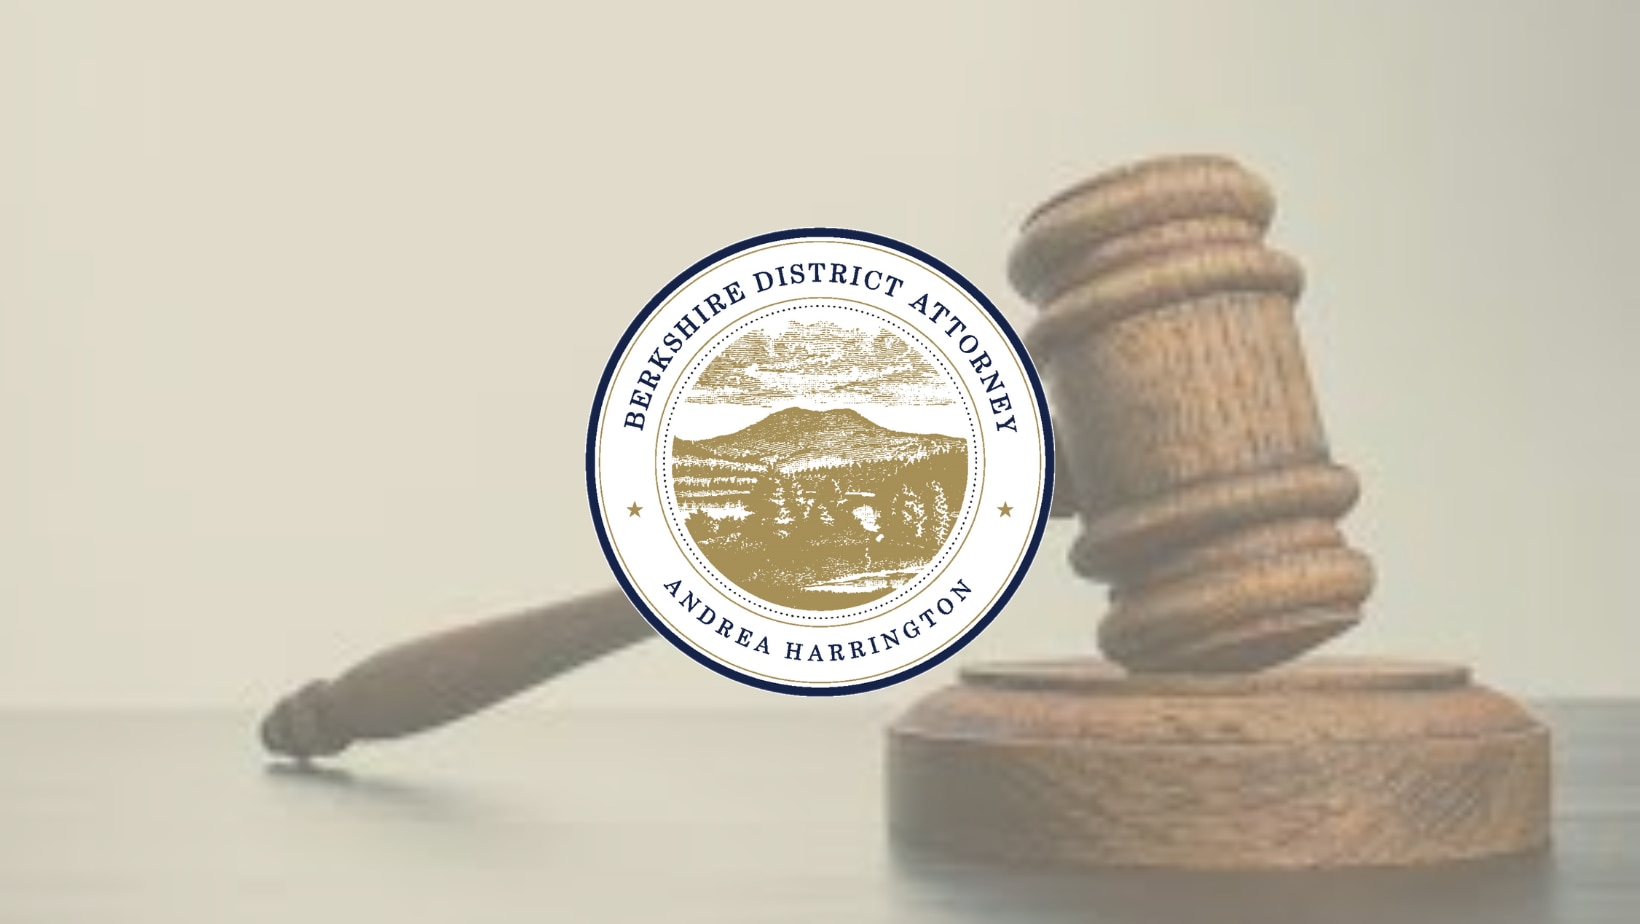 The Berkshire District Attorney's Office seal.